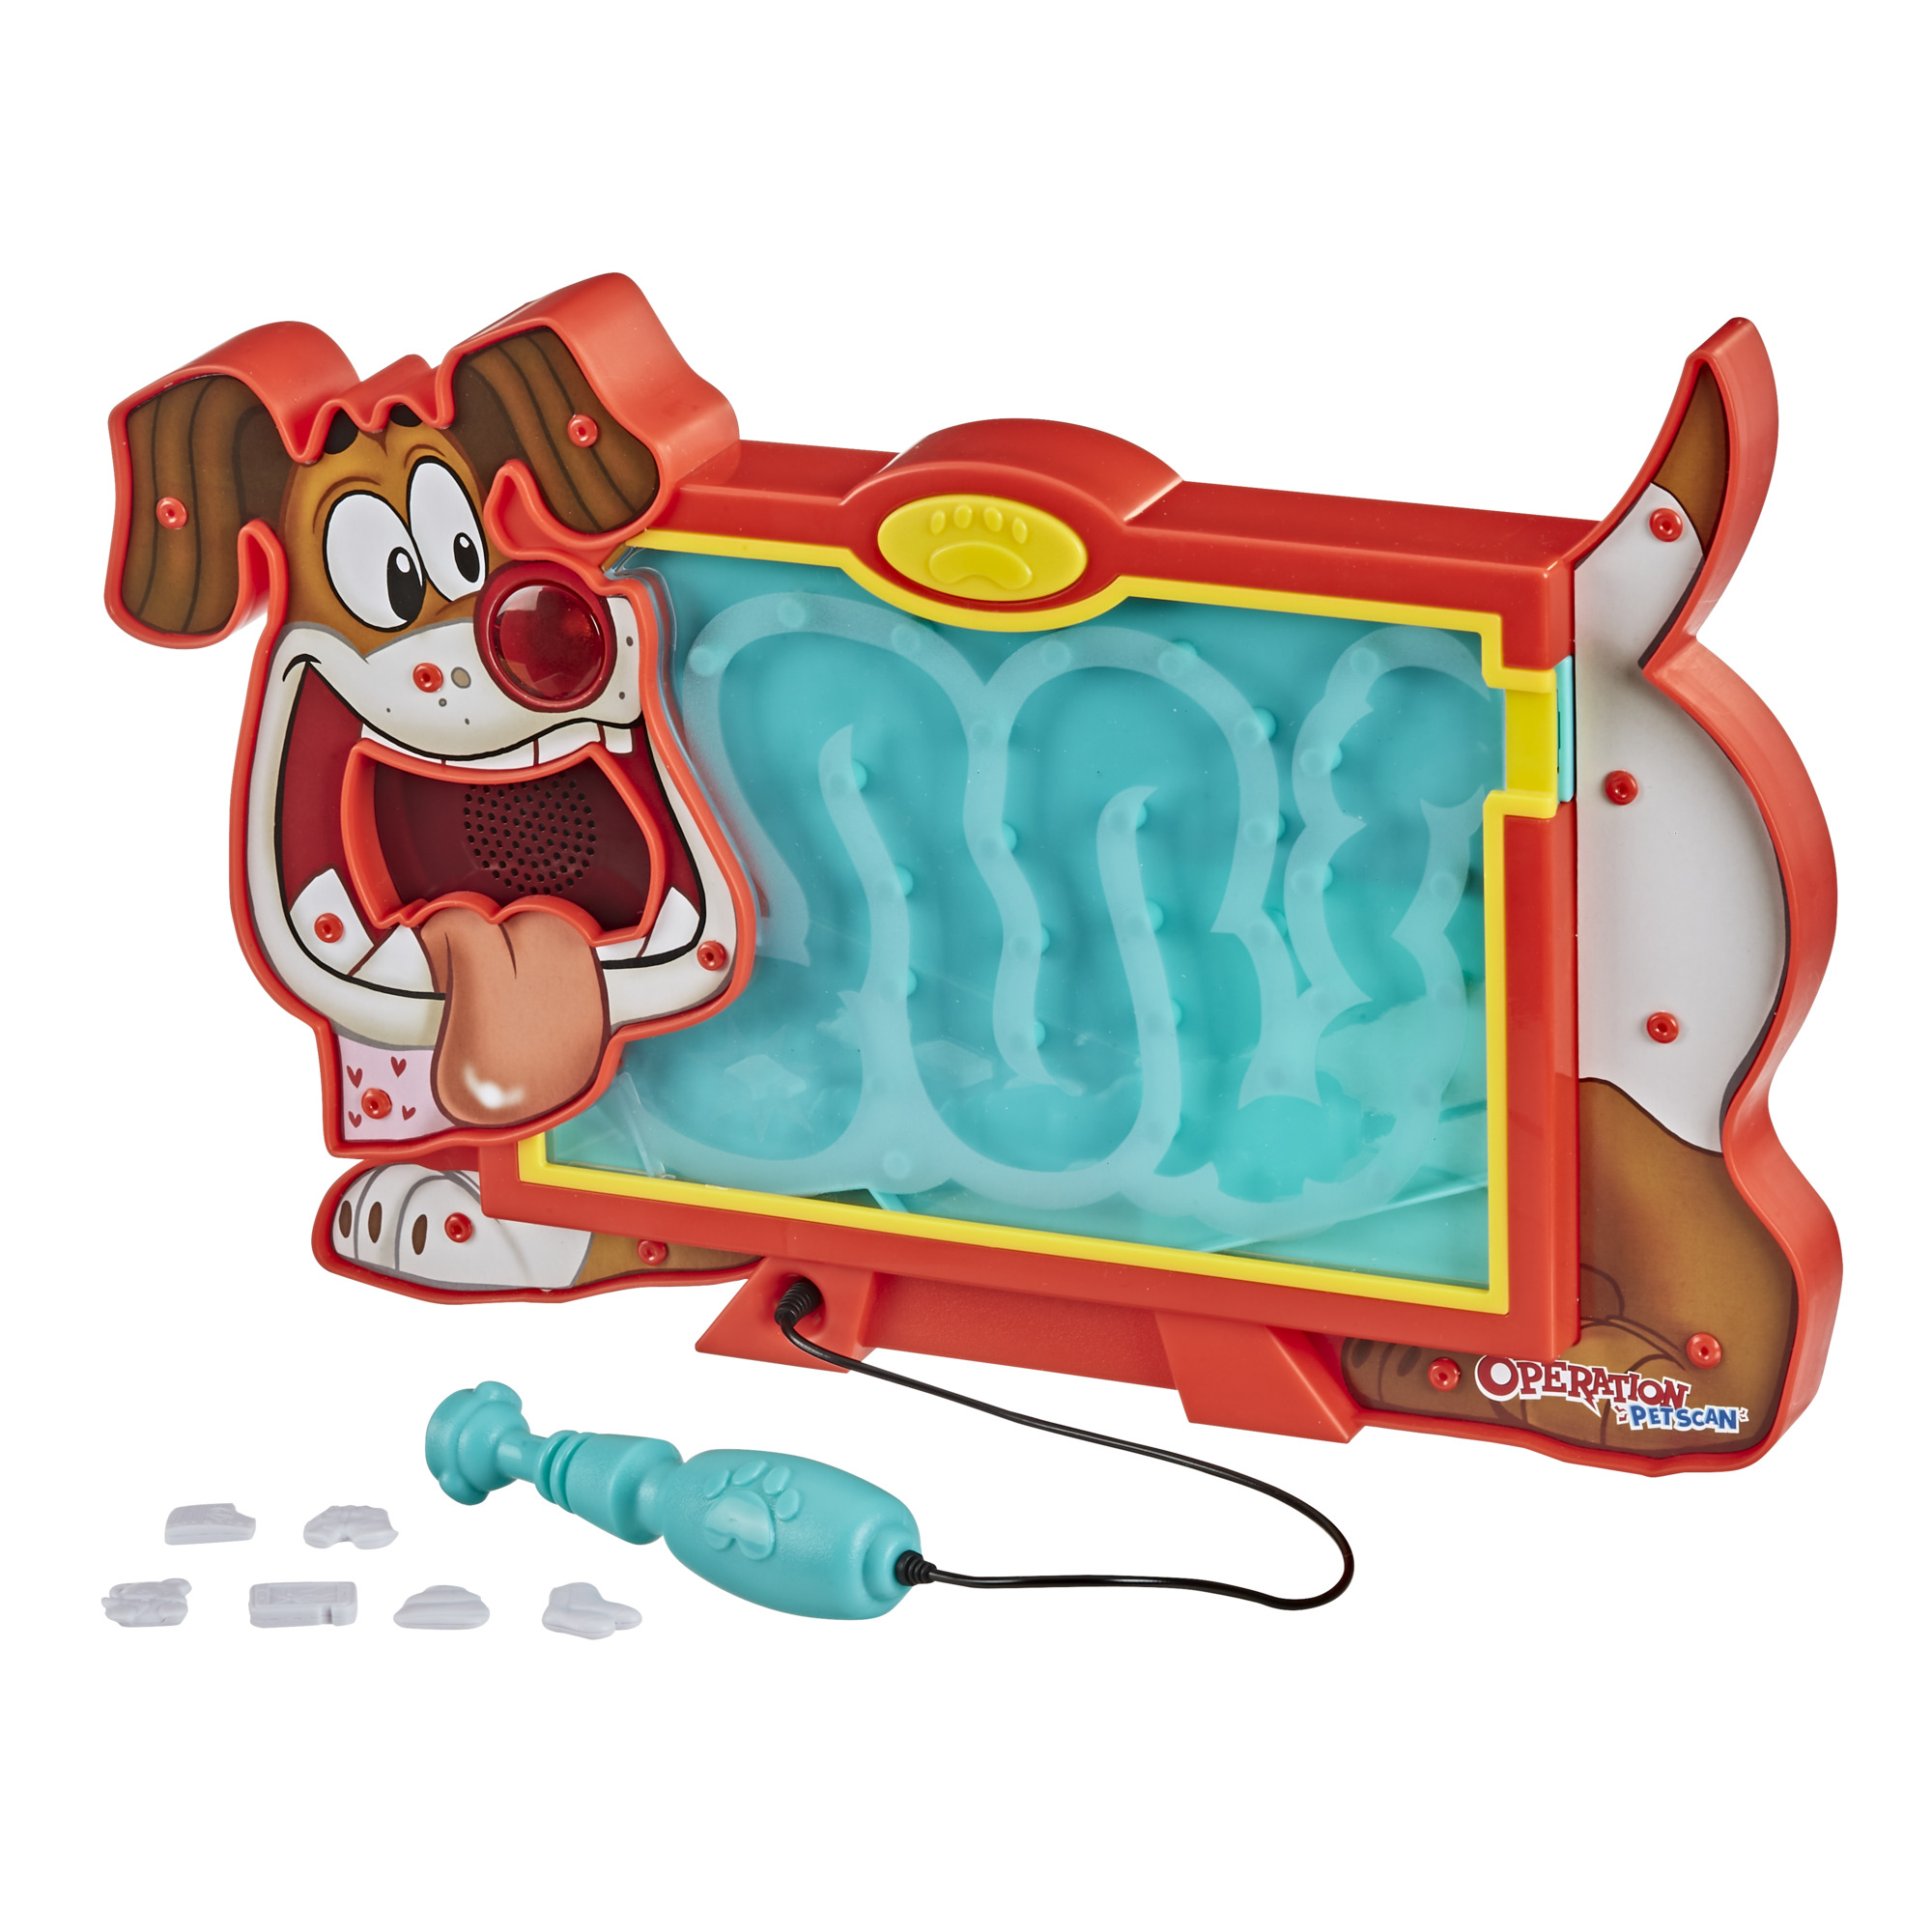 Operation Pet Scan Board Game With Silly Sounds, for Kids Ages 6 and Up - image 2 of 8